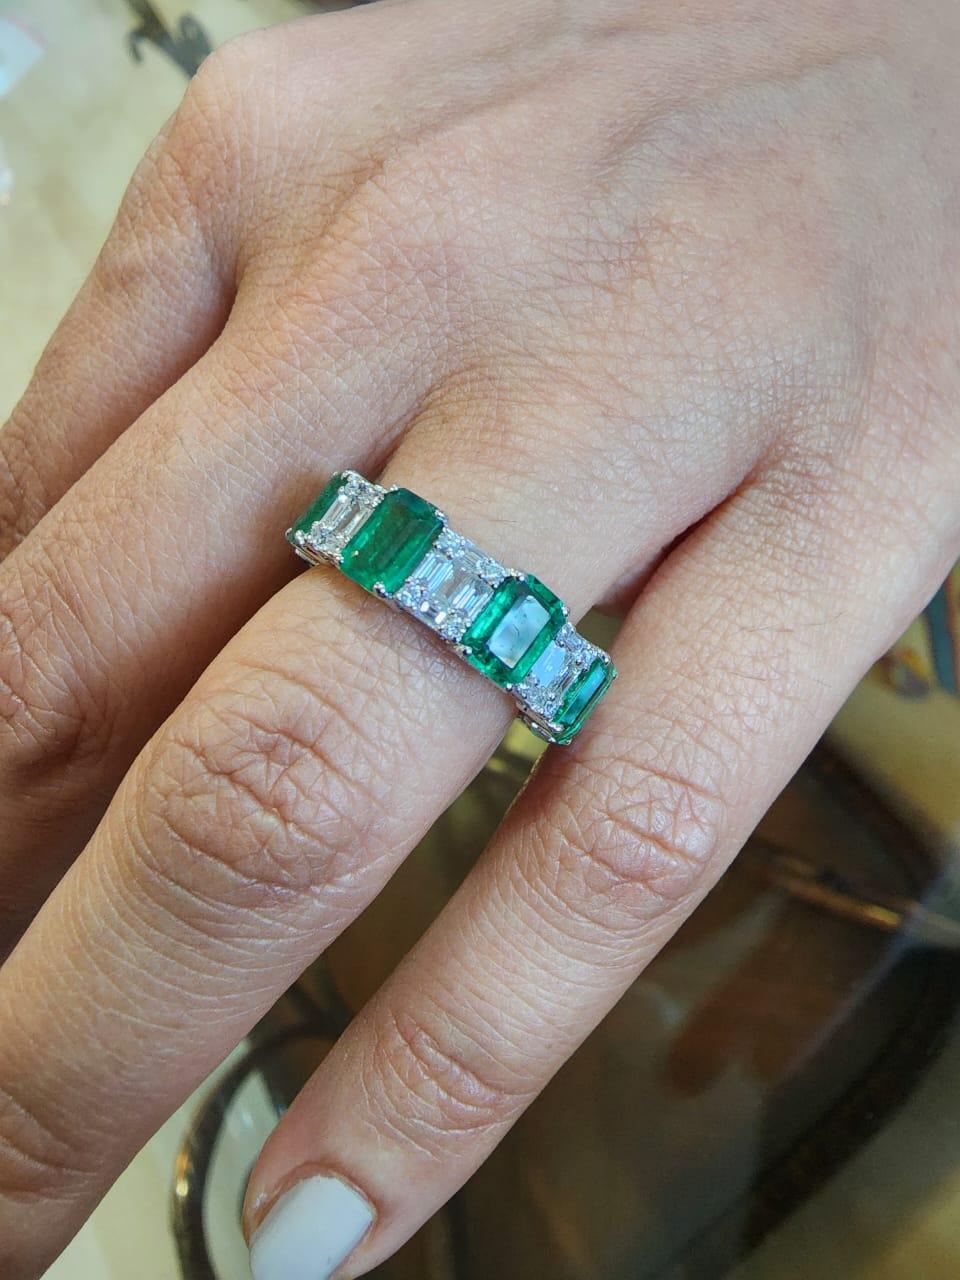 This is an amazing natural  1.15carats diamond & emerald 4.43carats of Gold Weight is 3.02 gms (18k)

It’s very hard to capture the true color and luster of the stone, I have tried to add pictures which are taken professionally and by me from my I